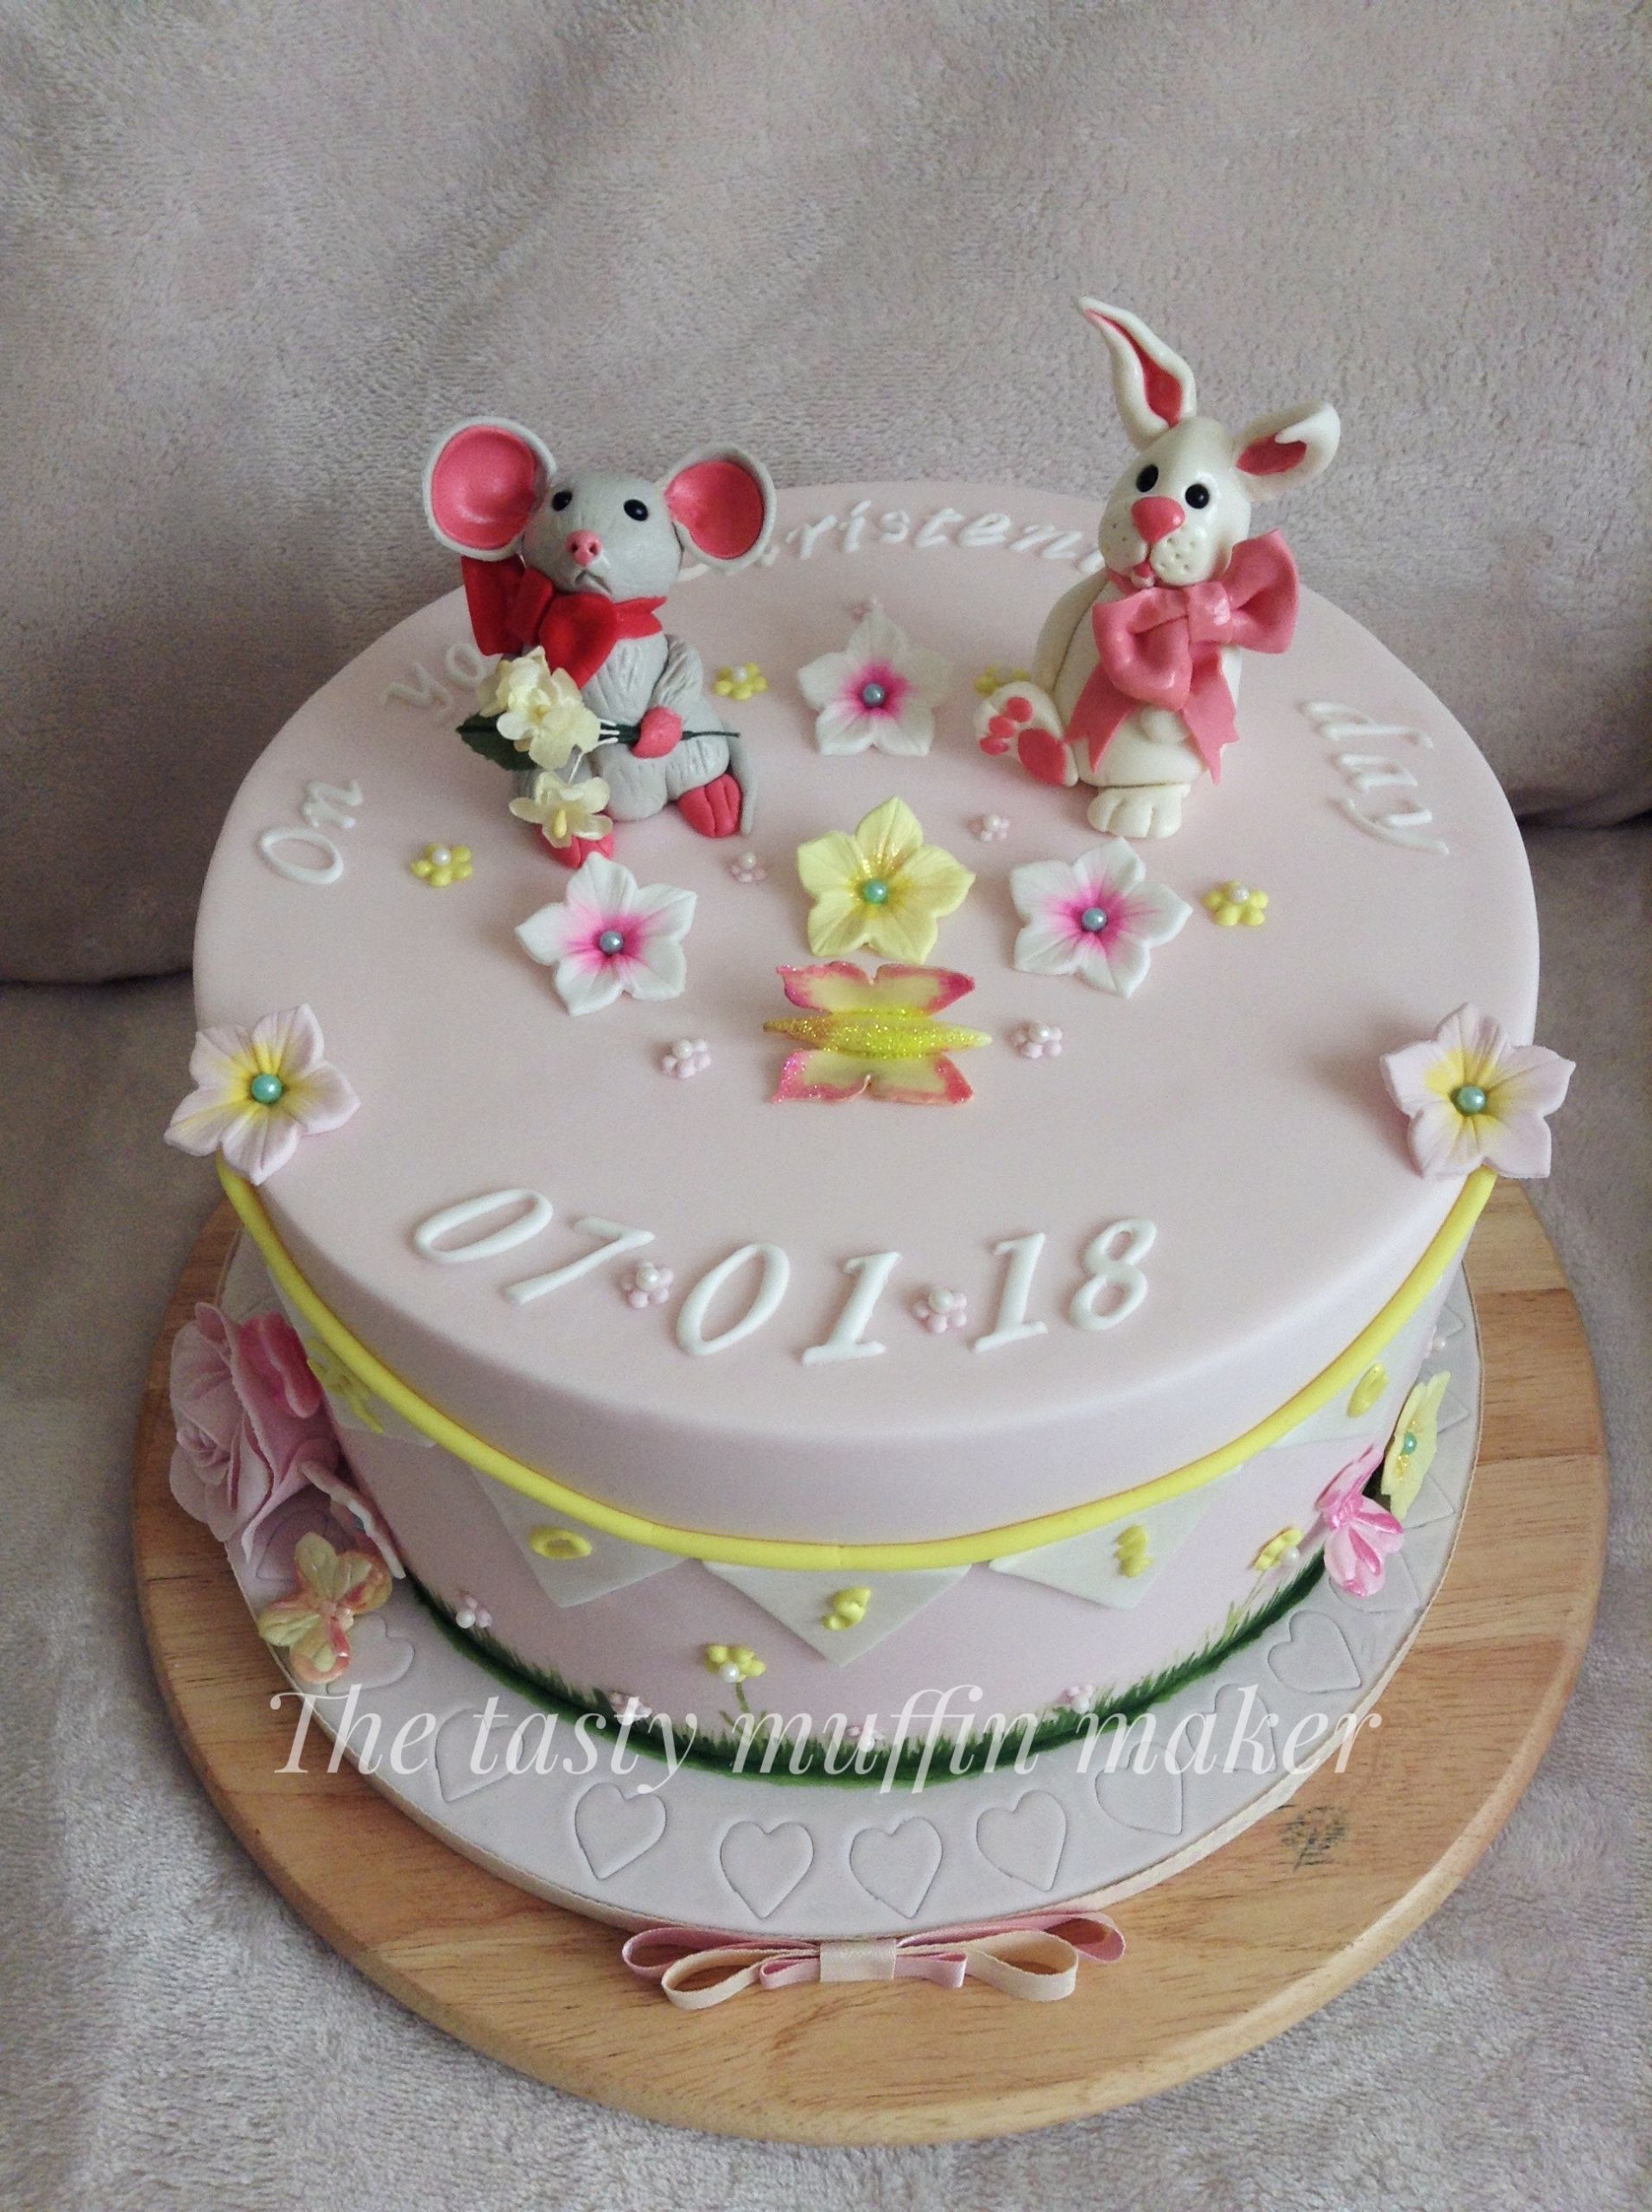 Gluten Free Birthday Cake Delivery
 Birthday cakes delivered Bexhill cake deliveries Battle